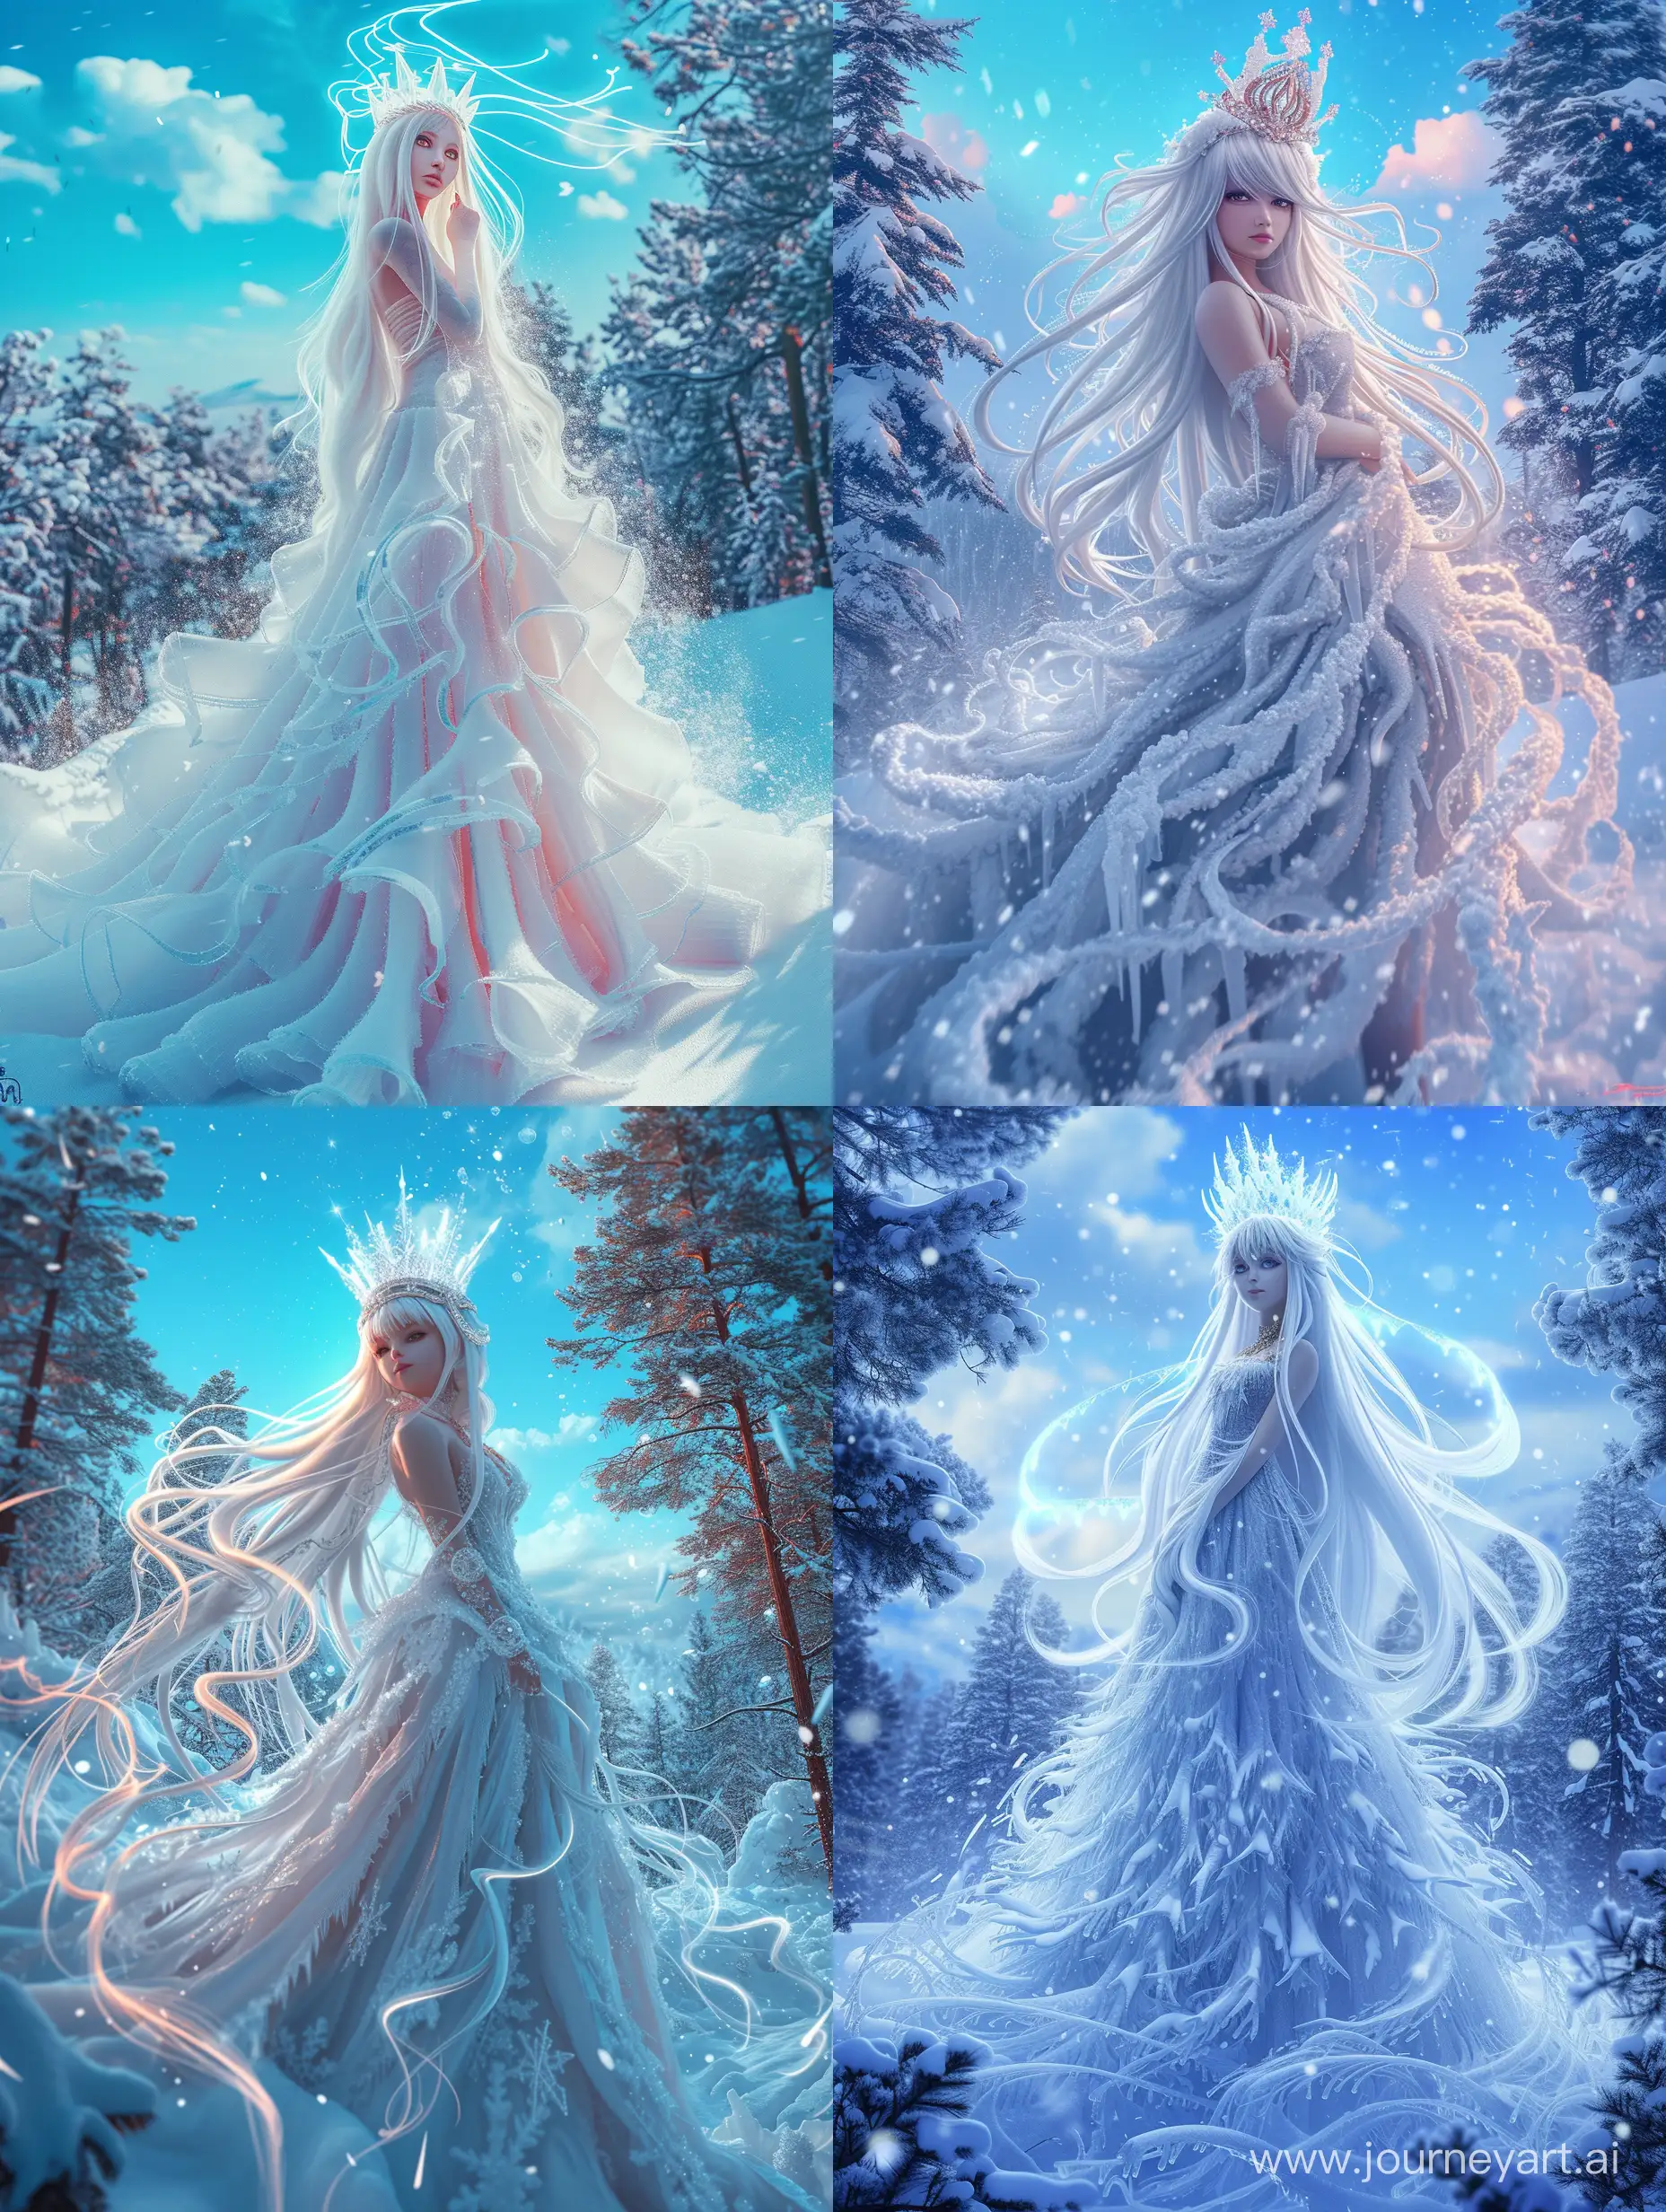 Ethereal-Winter-Queen-Enchanting-Snow-Dress-in-a-Mystical-Forest